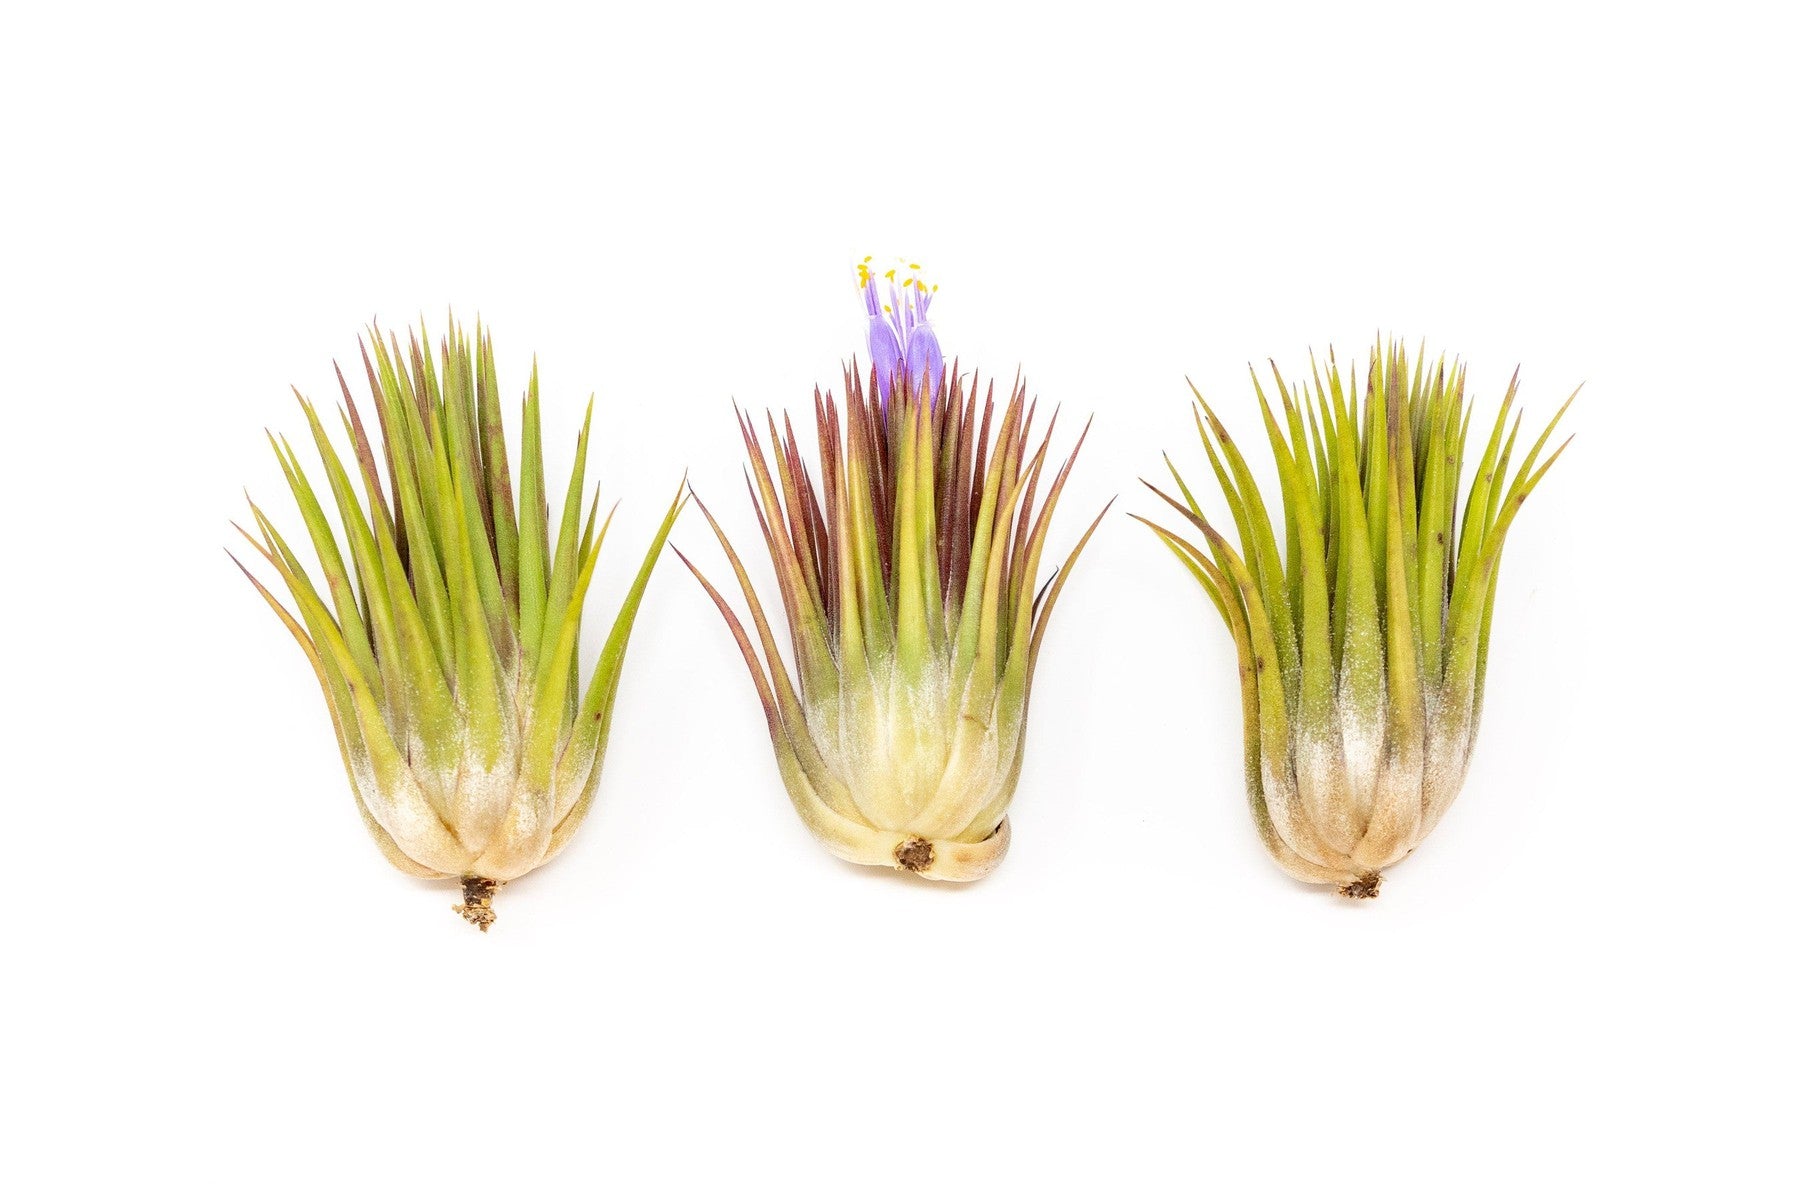 SALE - Tillandsia Ionantha Guatemala "Macho" Air Plants - Set of 5 or 10 - 30% Off-airplant-The Succulent Source